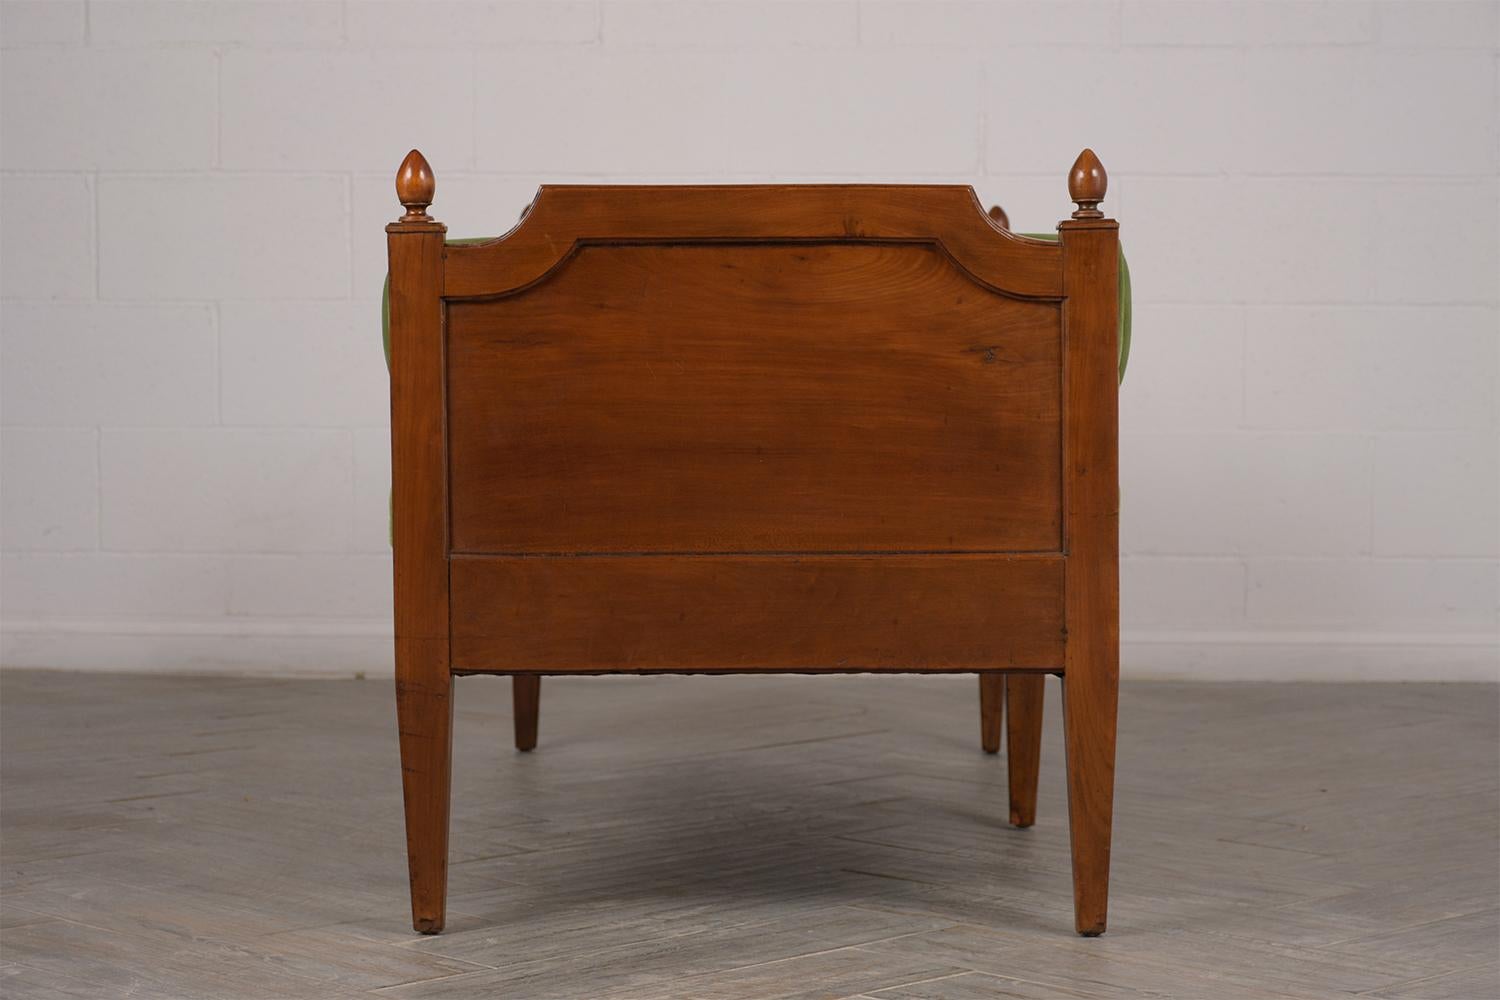 Mid-19th Century Rare 1840s Completely Restored Walnut Wooden Bench